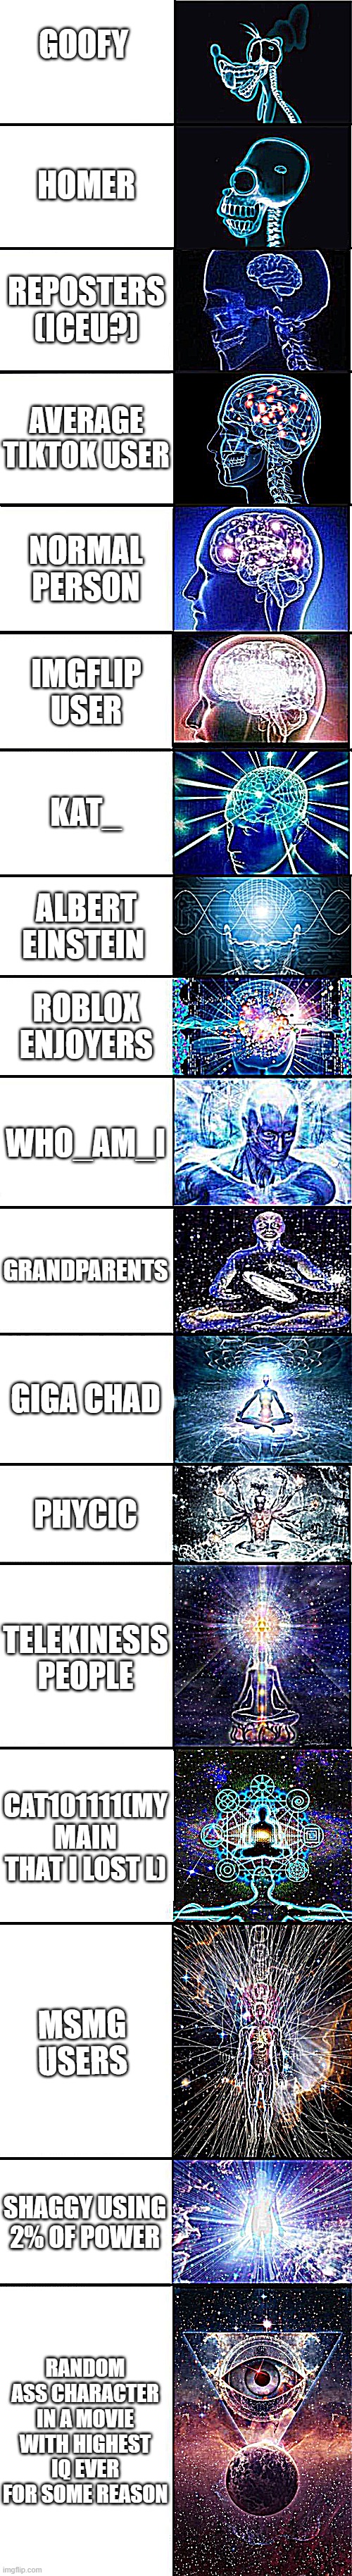 expanding brain: 9001 | GOOFY; HOMER; REPOSTERS (ICEU?); AVERAGE TIKTOK USER; NORMAL PERSON; IMGFLIP USER; KAT_; ALBERT EINSTEIN; ROBLOX ENJOYERS; WHO_AM_I; GRANDPARENTS; GIGA CHAD; PHYCIC; TELEKINESIS
PEOPLE; CAT101111(MY MAIN THAT I LOST L); MSMG USERS; SHAGGY USING 2% OF POWER; RANDOM ASS CHARACTER IN A MOVIE WITH HIGHEST IQ EVER FOR SOME REASON | image tagged in expanding brain 9001,ong | made w/ Imgflip meme maker